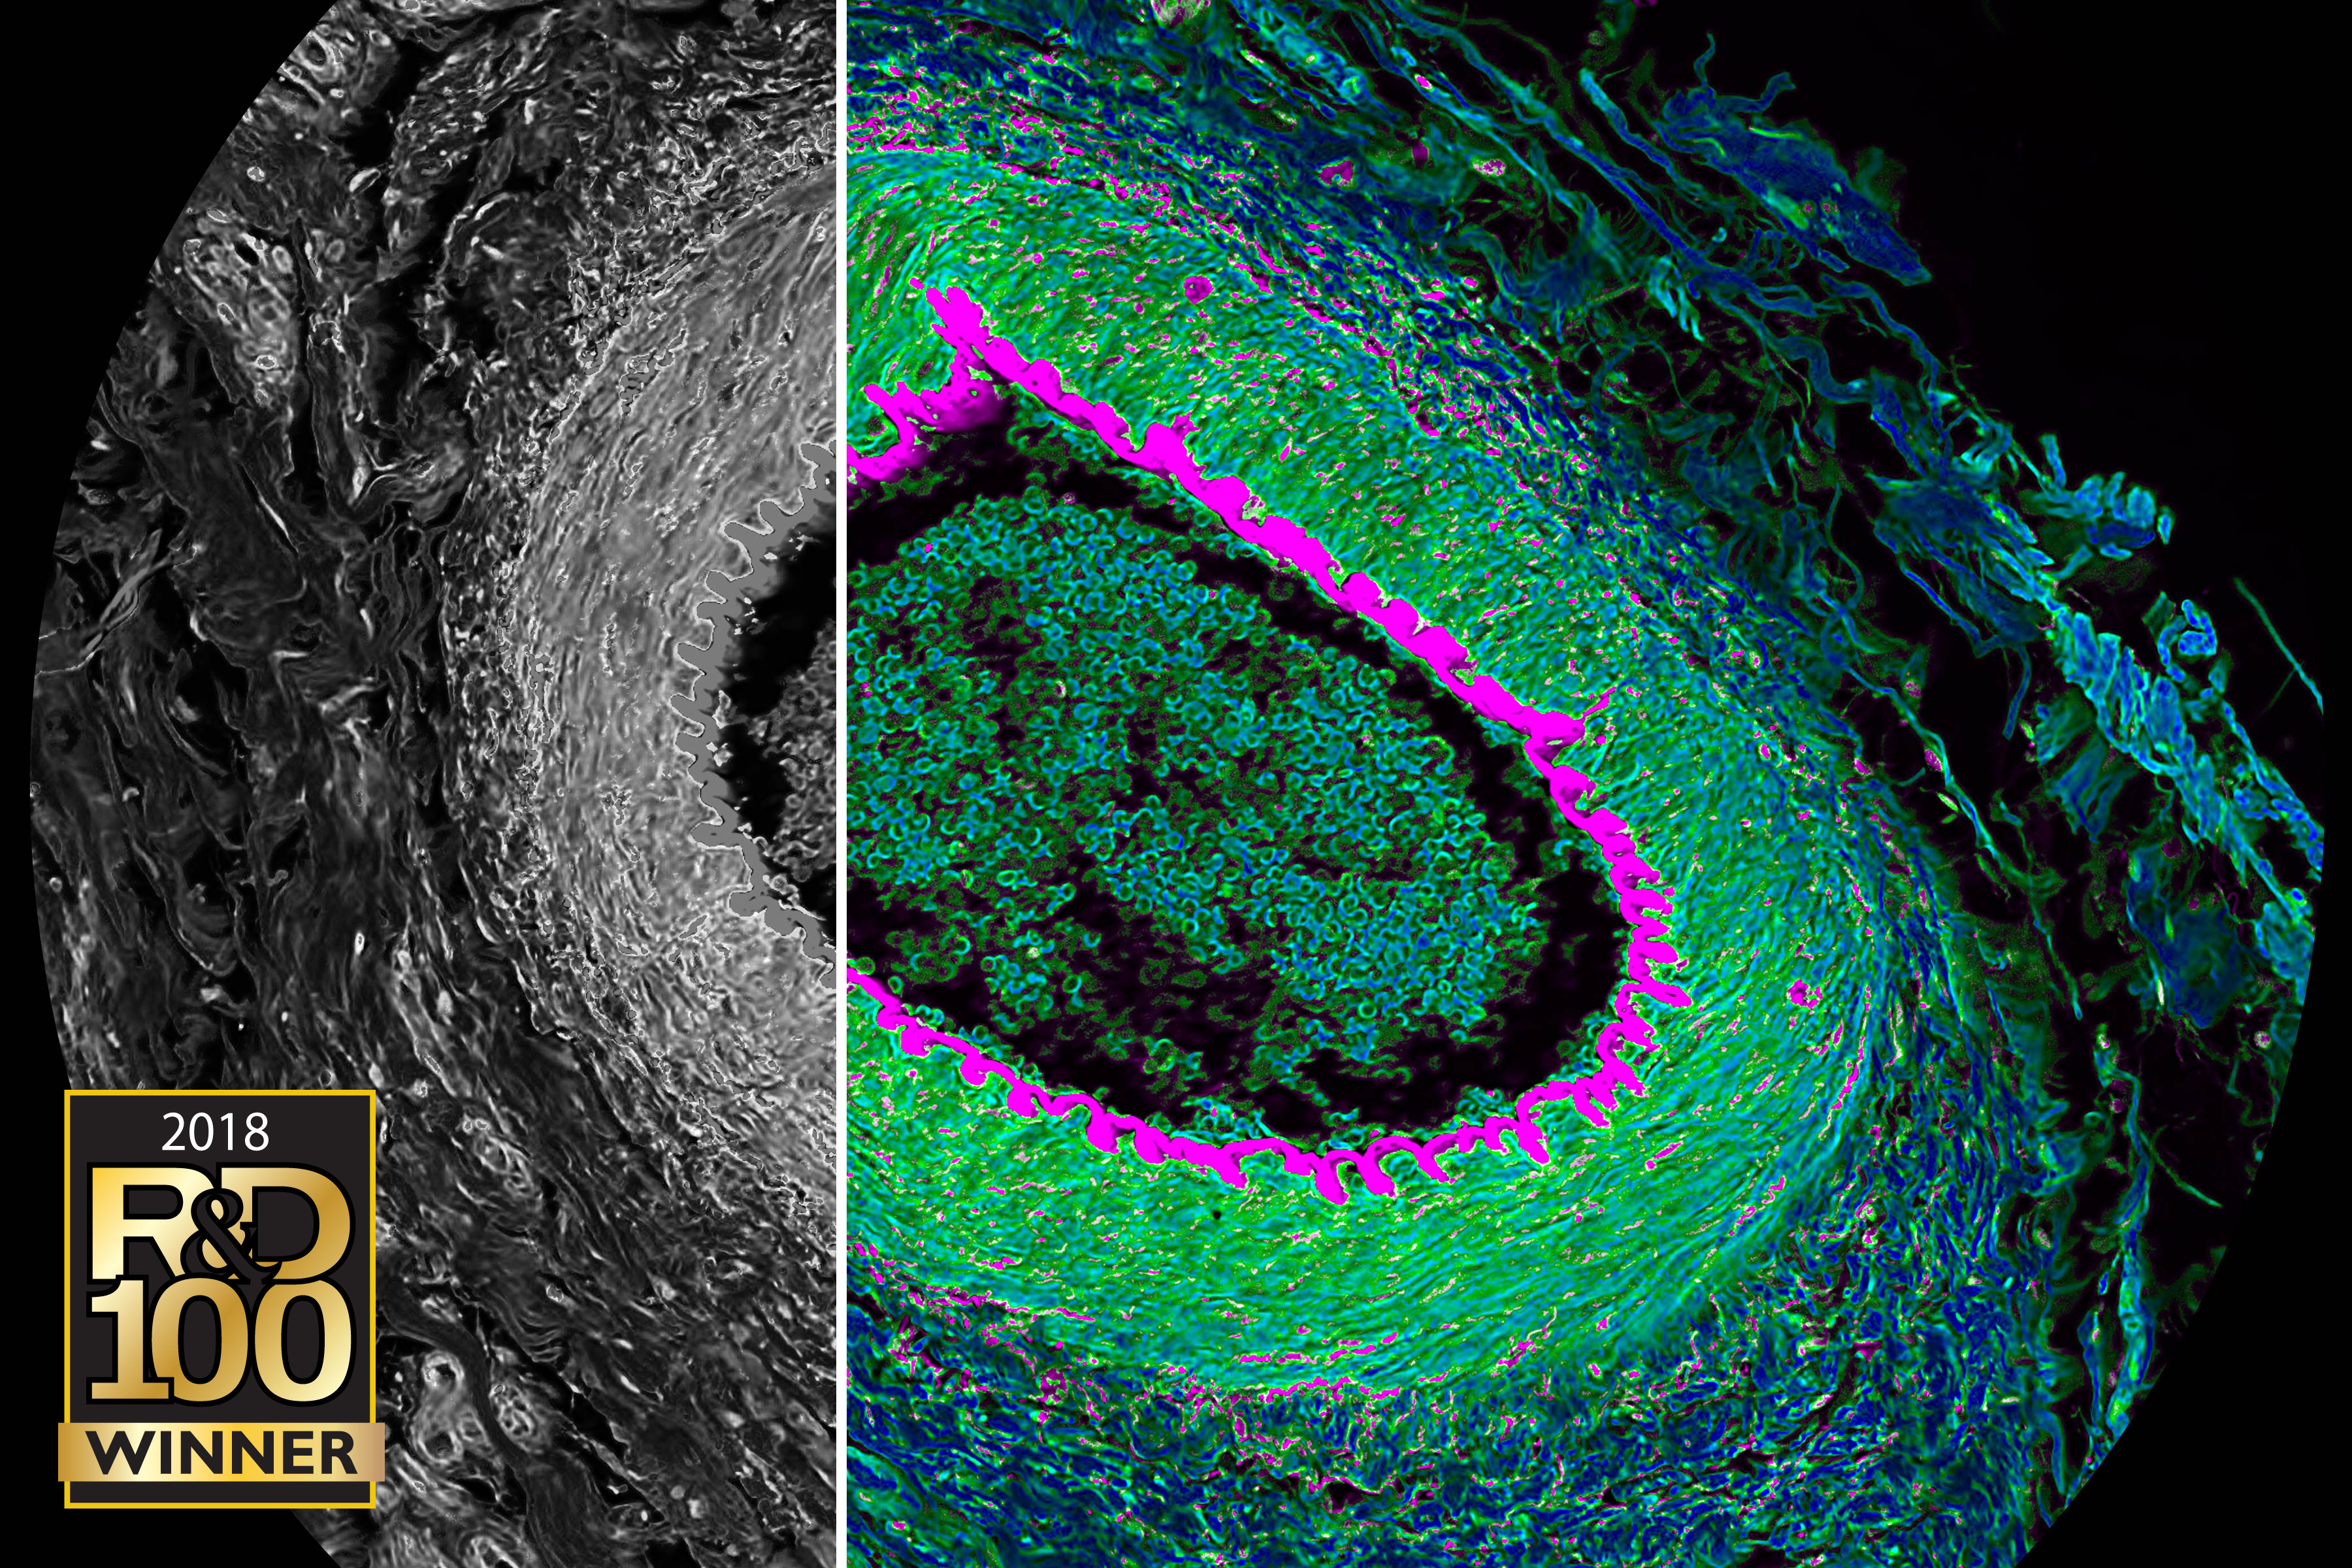 Histological section from cat eye. Simultaneous spectral (grey) and FLIM (color) confocal imaging reveals contrast by lifetime. Acquisition and visualization using SP8 FALCON and LAS X software.